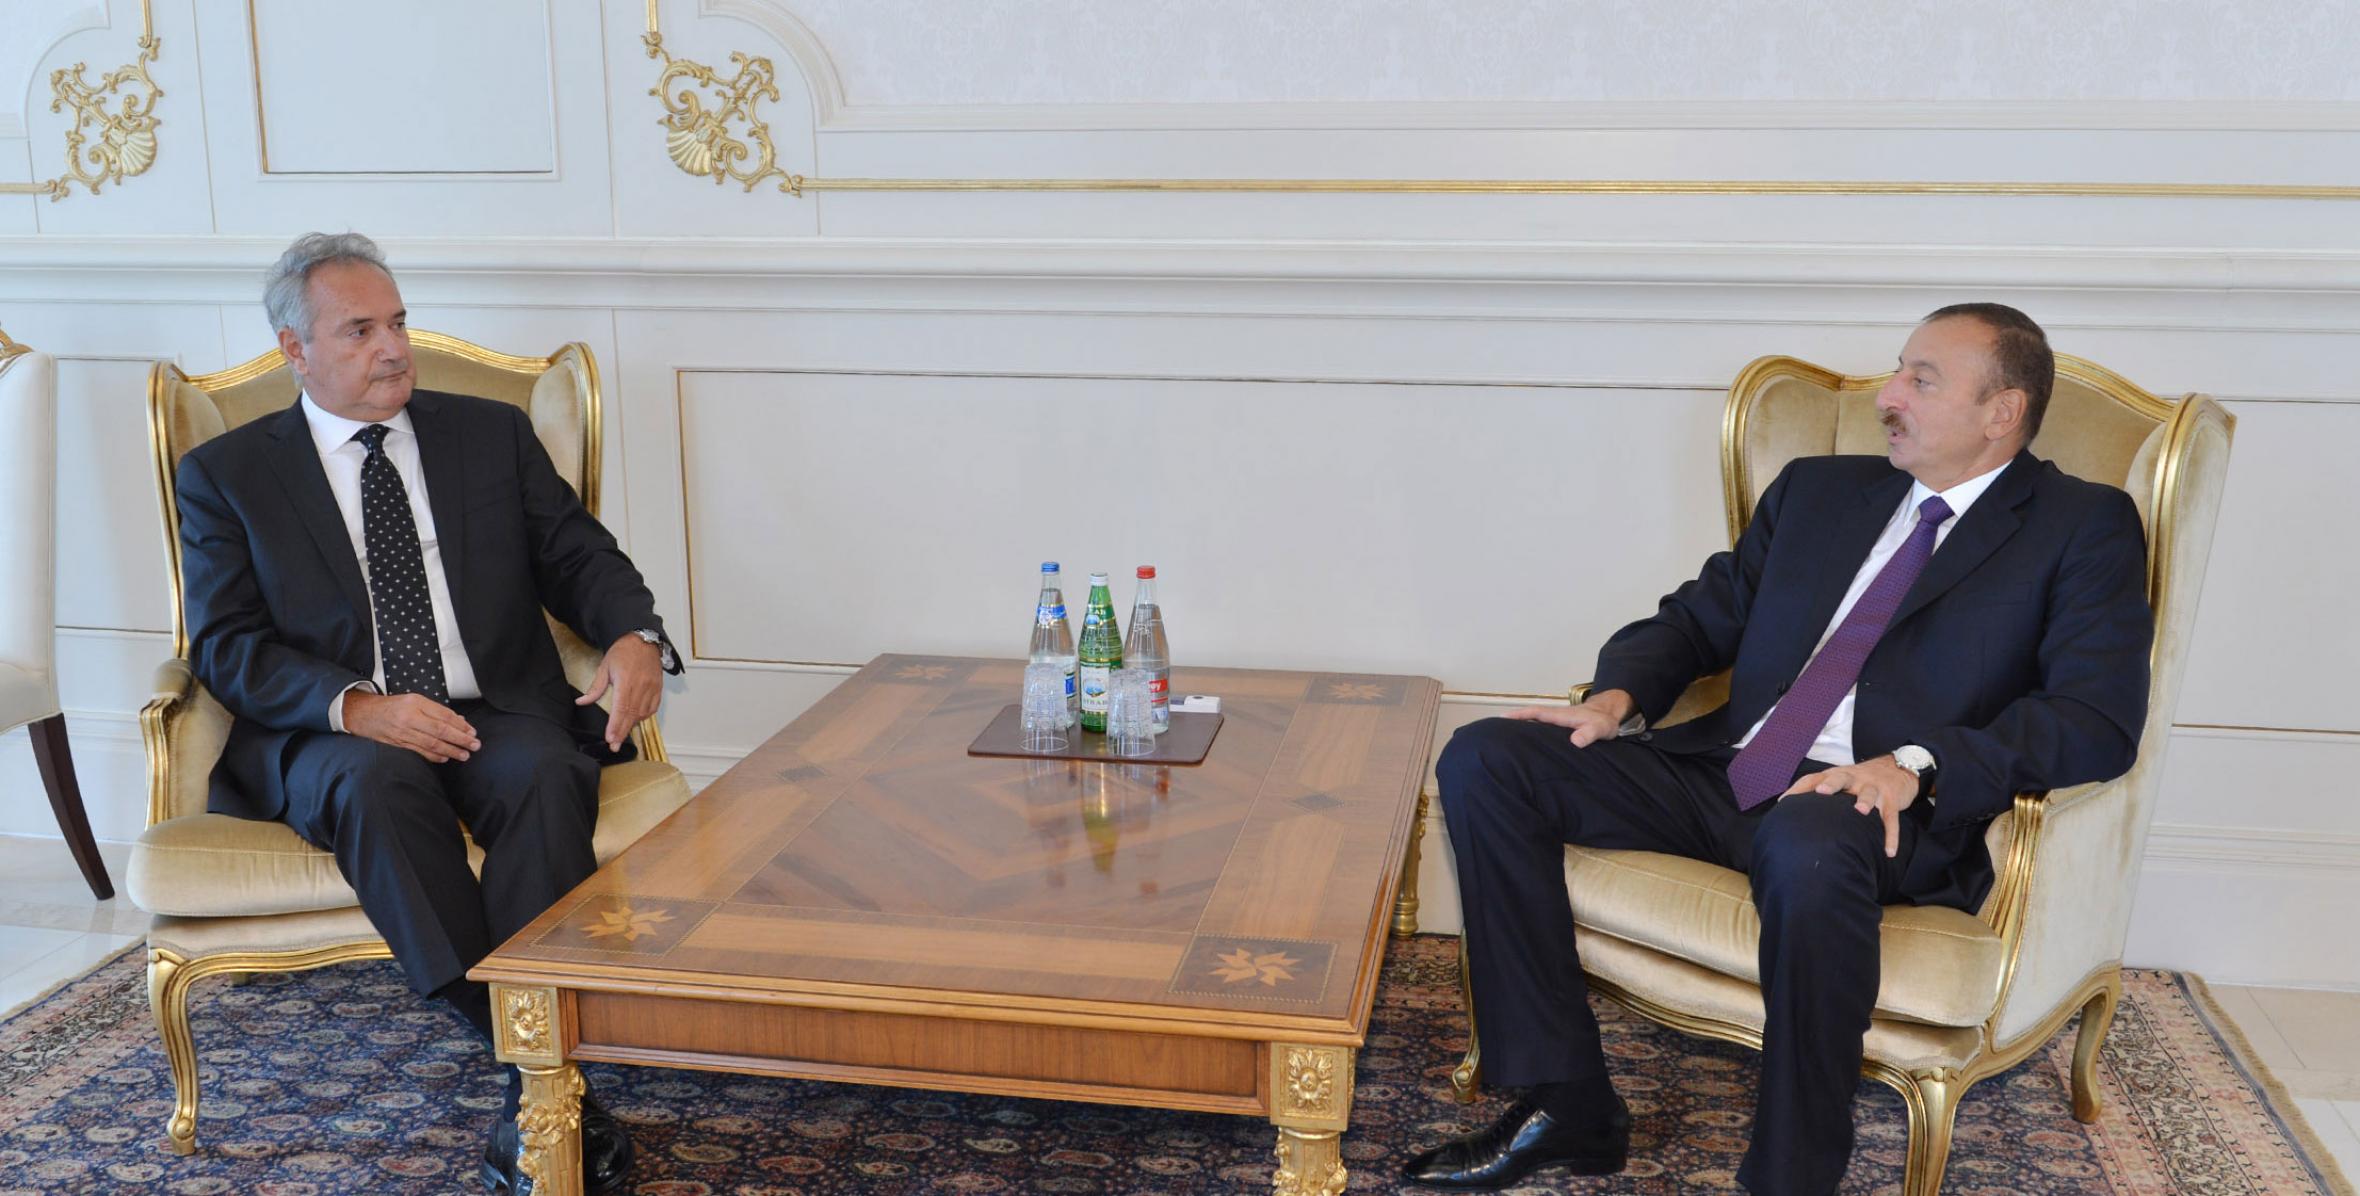 Ilham Aliyev accepted the credentials of the Ambassador of Greece to Azerbaijan